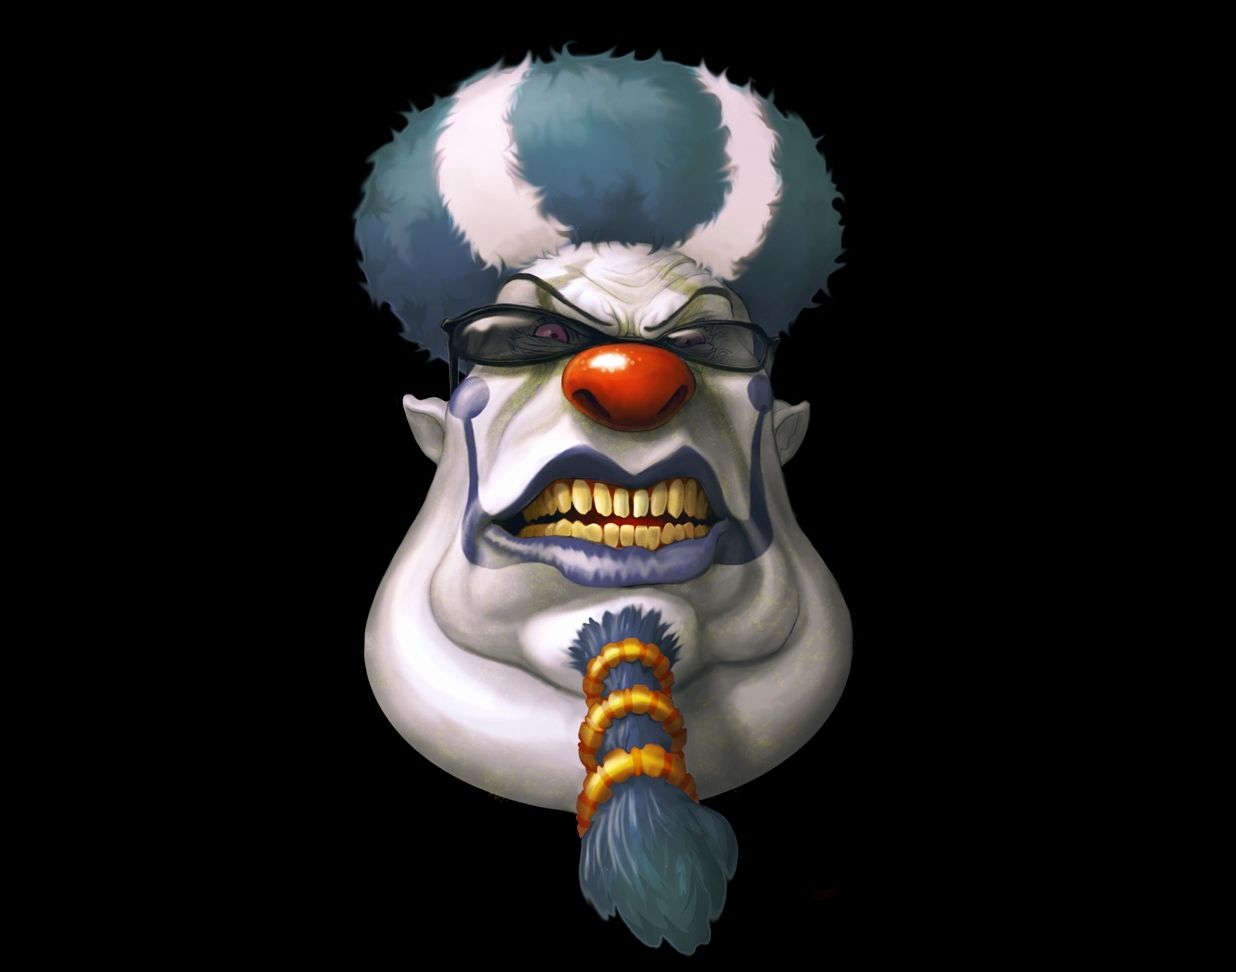 Scary Clown Wallpaper Fresh andseeworld is All About Funny Amazing